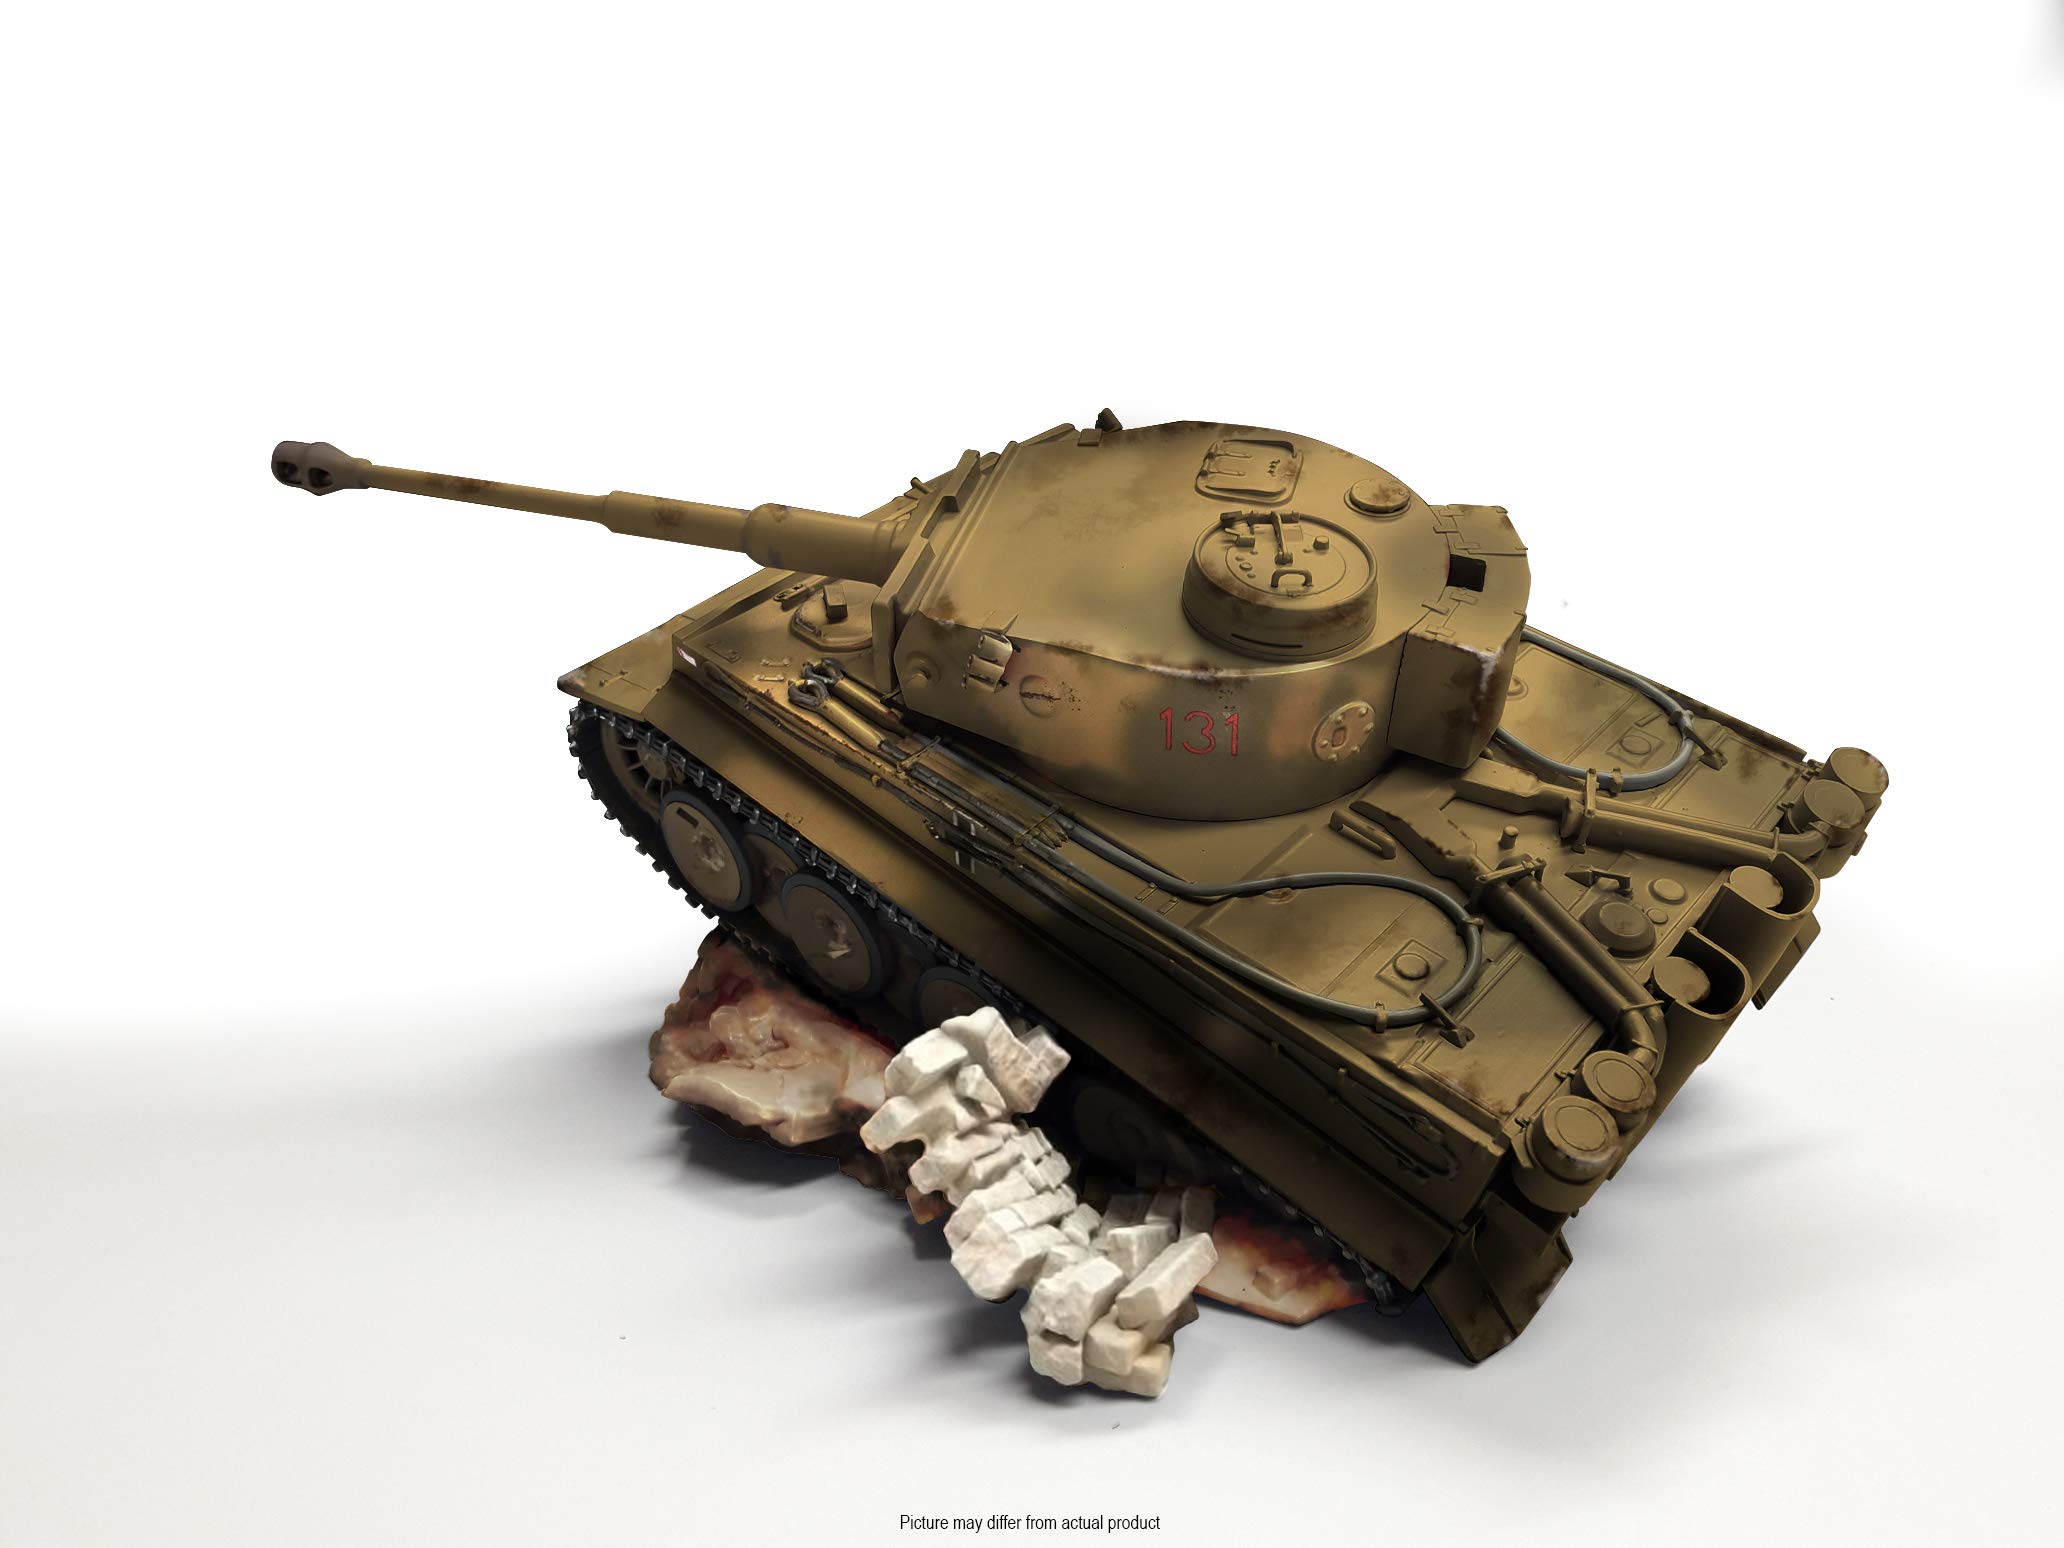 The World of Tanks Roll Out Collector's Edition - Xbox One, PlayStation 4, Windows